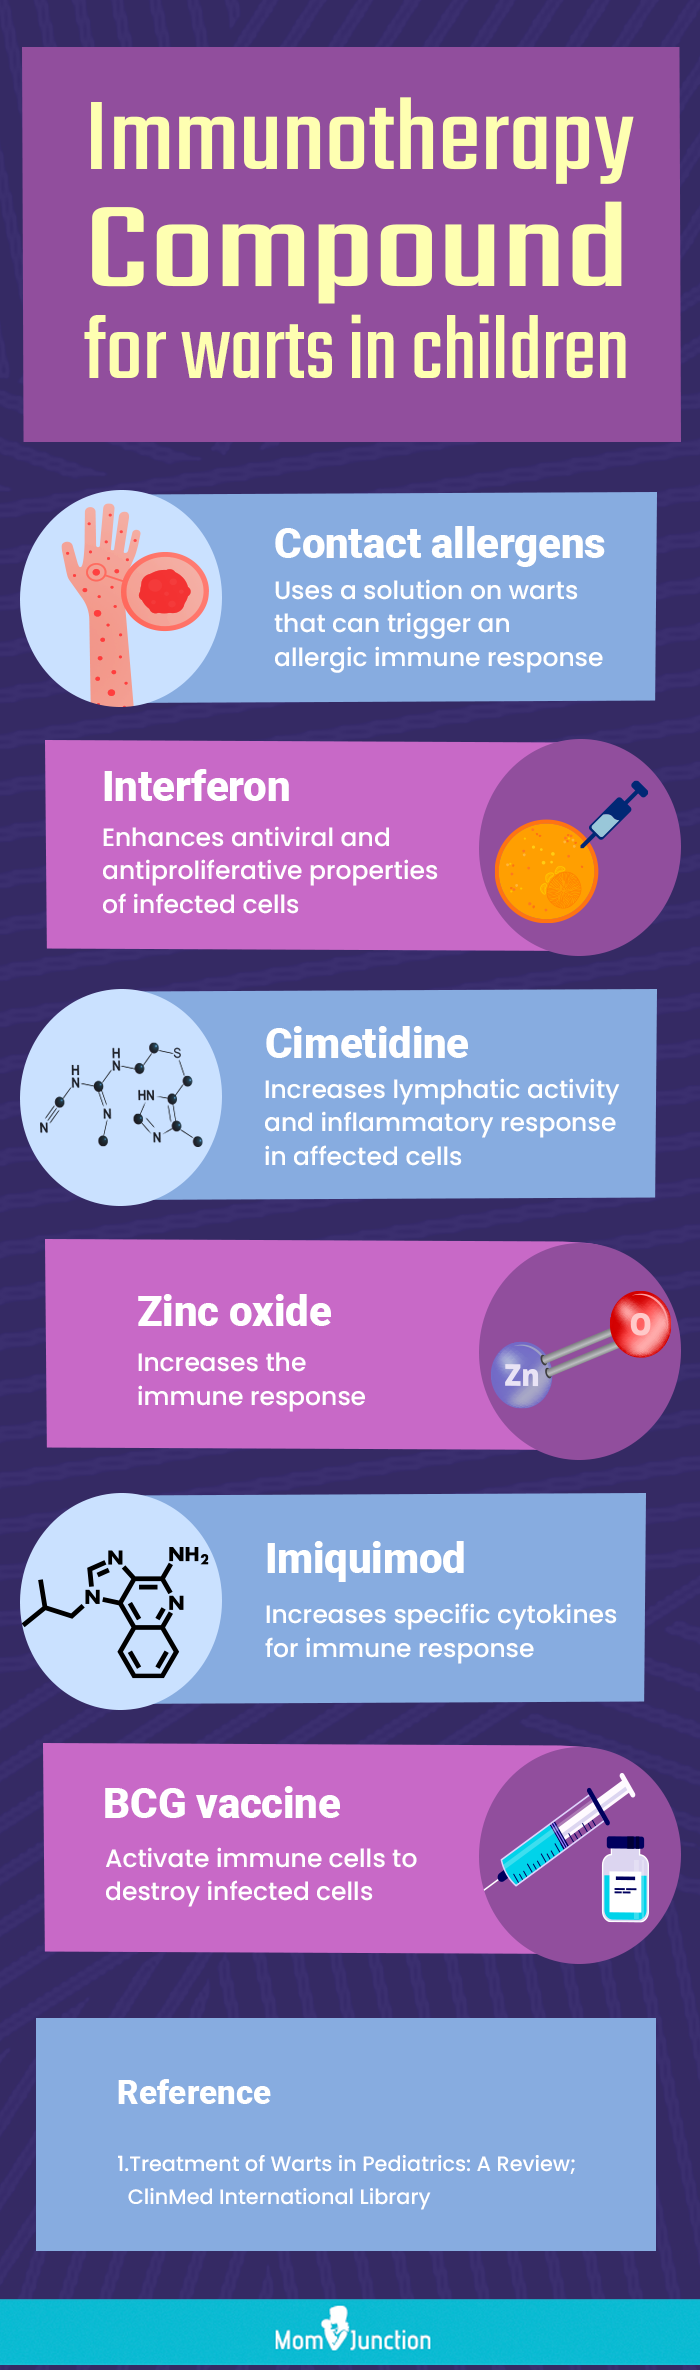 immunotherapy compounds for warts in children (infographic)